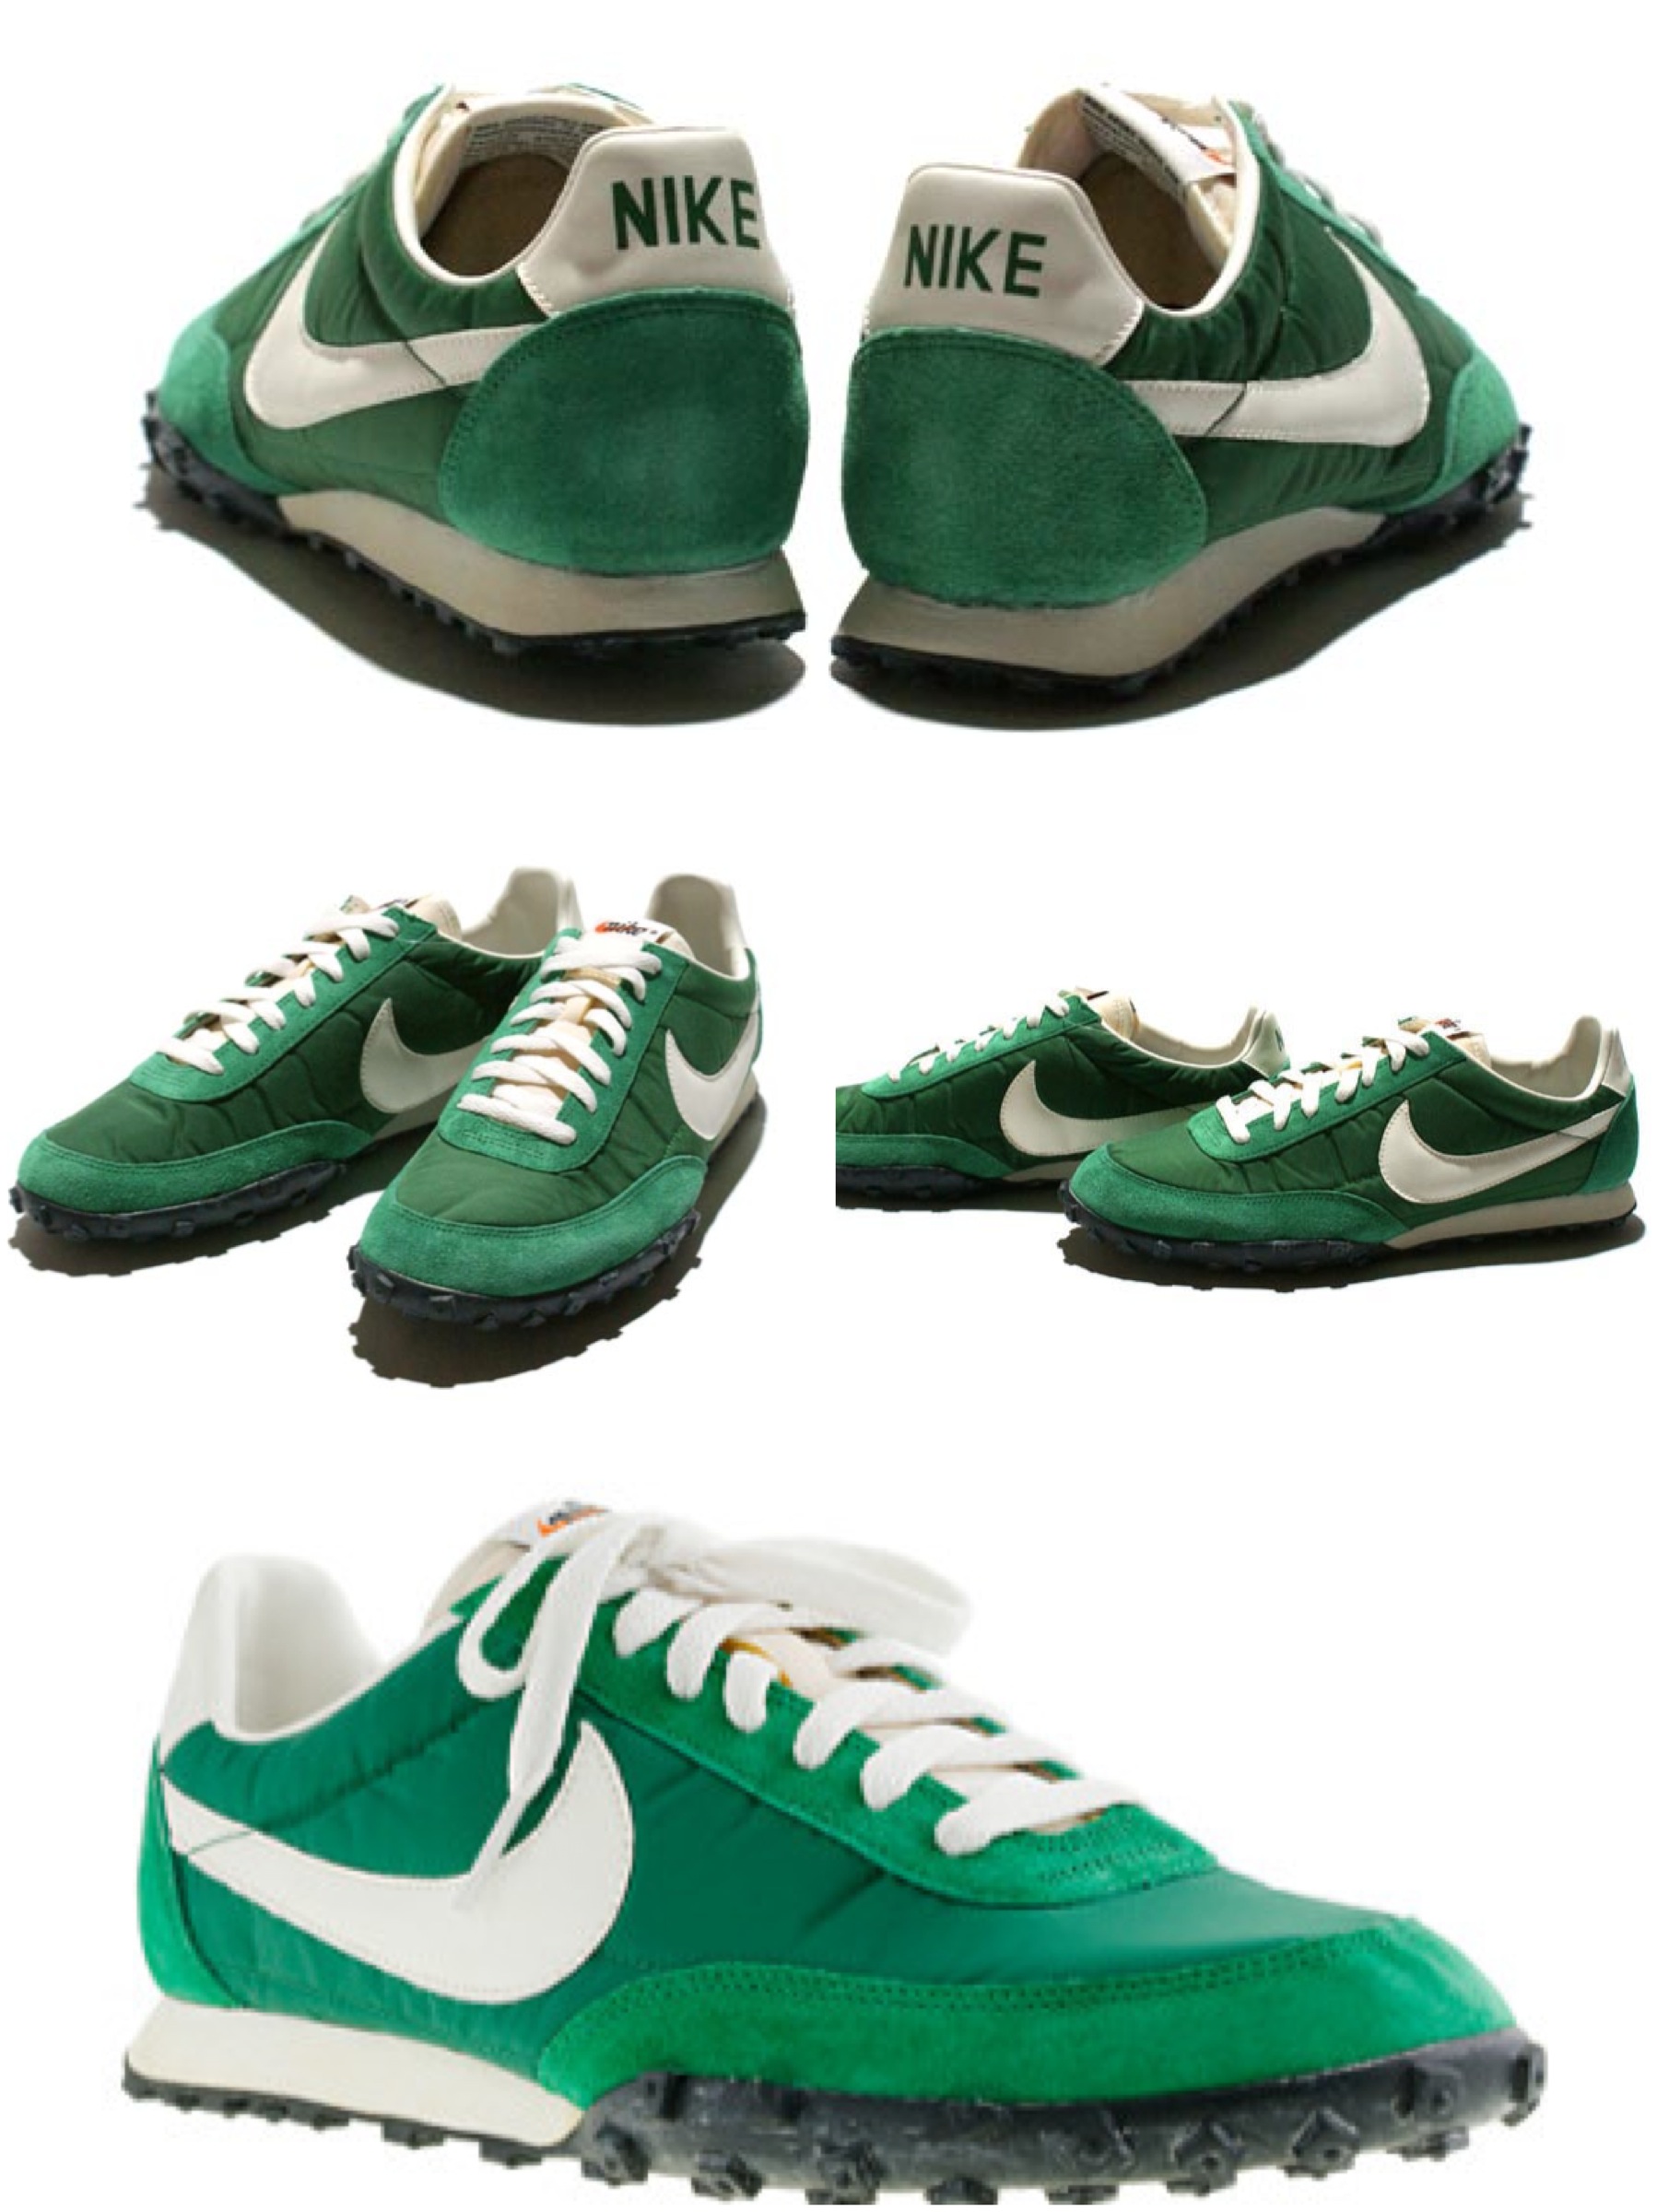 Nike Vintage Waffle Racer sneakers for J. Crew Dad's Picks